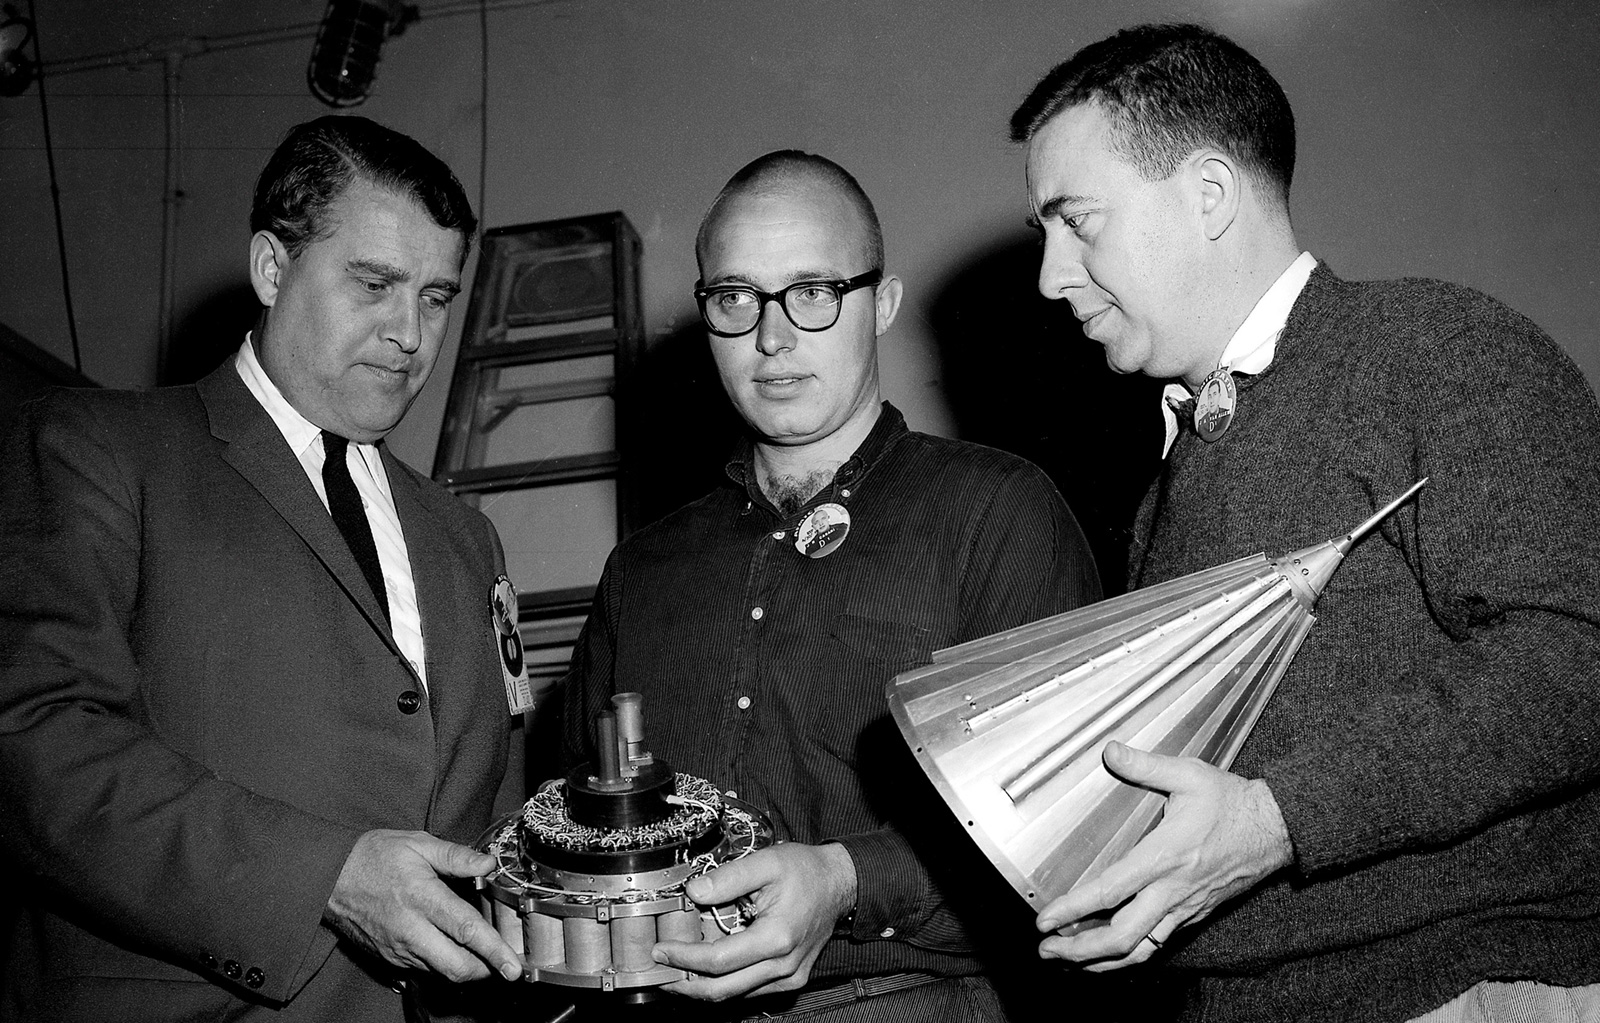 Black and white image of three men holding a small spacecraft.